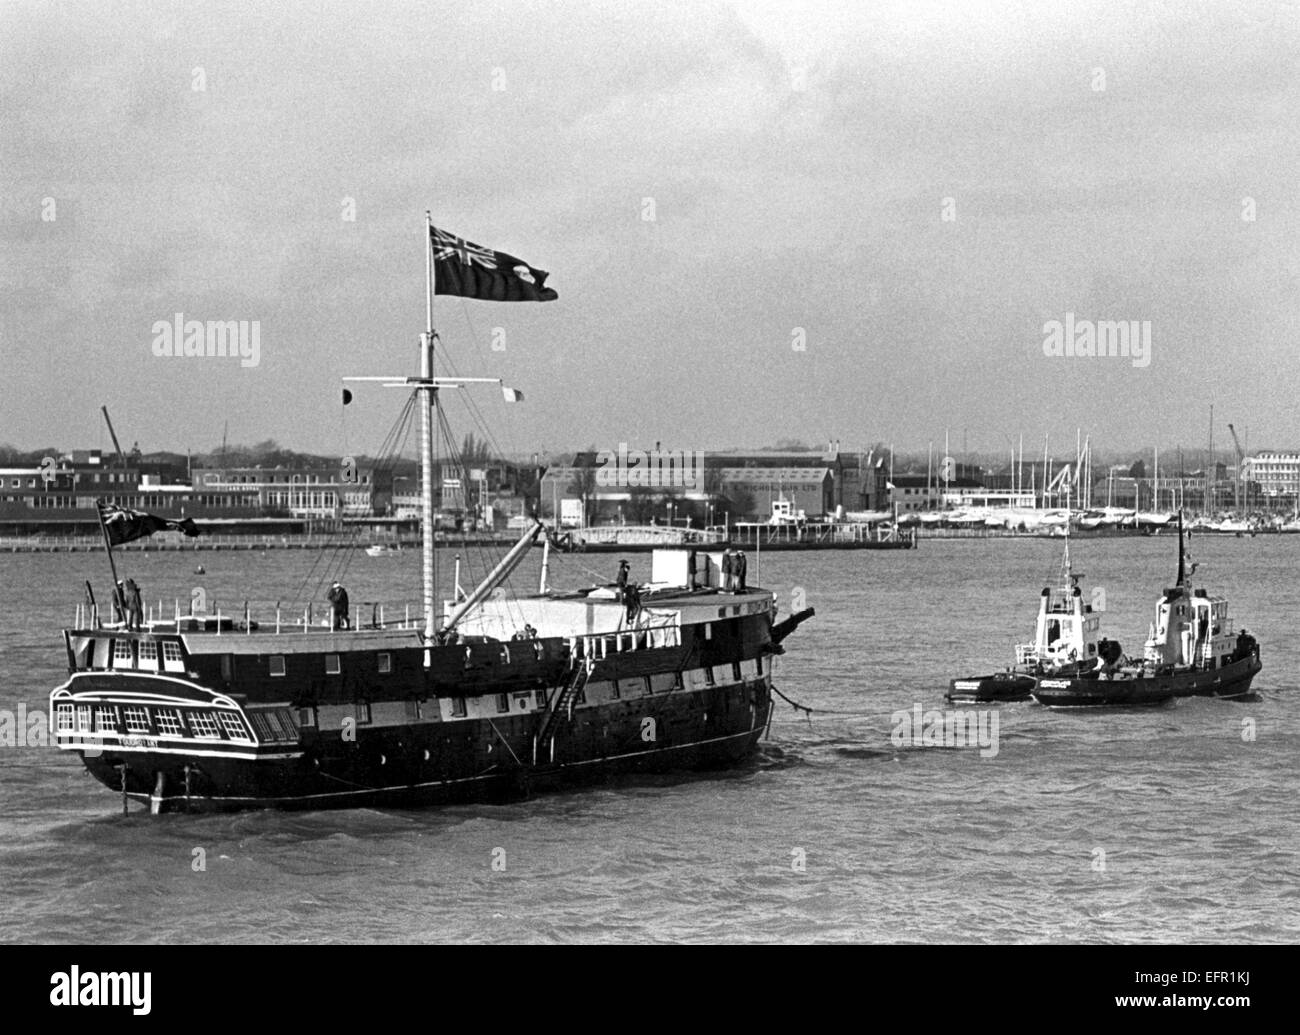 AJAXNETPHOTO. - 21ST JANUARY, 1977. PORTSMOUTH, ENGLAND. - WOODEN WALL RETURNS -  T.S. FOUDROYANT (EX TRINCOMALEE) UNDER TOW ENTERING HARBOUR AFTER RECENT REFIT. PHOTO:JONATHAN EASTLAND/AJAX REF:2772101 Stock Photo